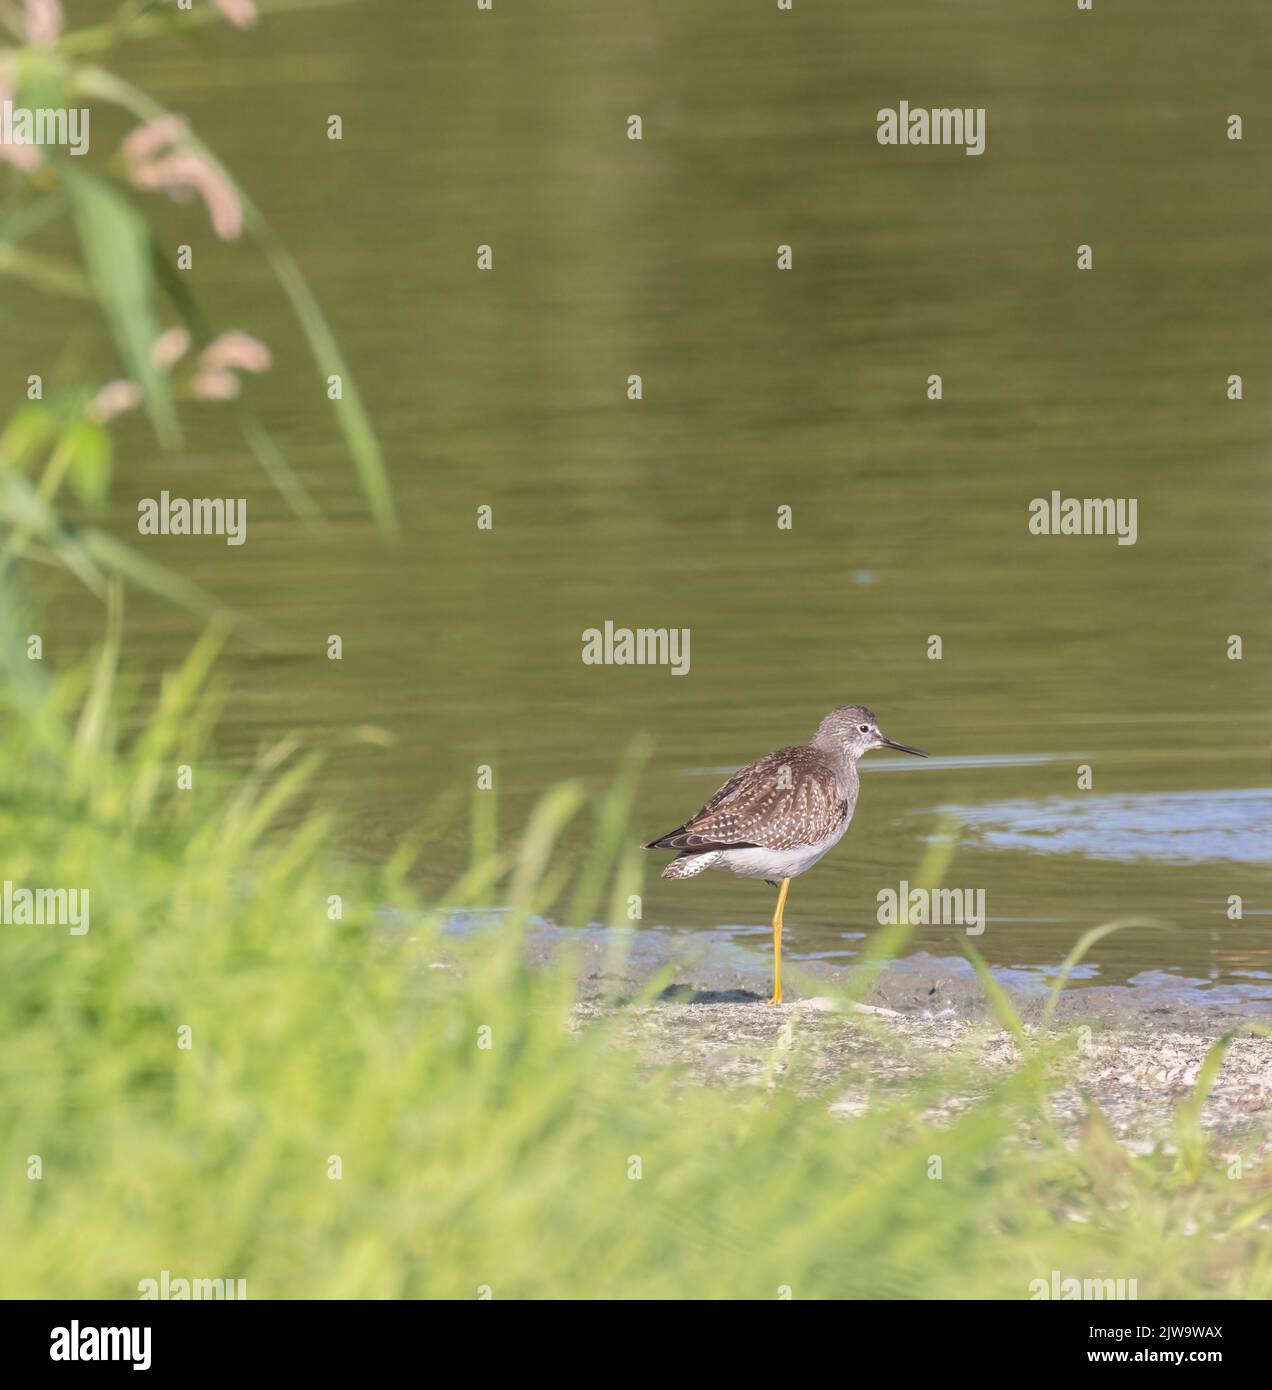 A Lesser Yellowlegs Sandpiper at a pond with reflections in late summer Stock Photo